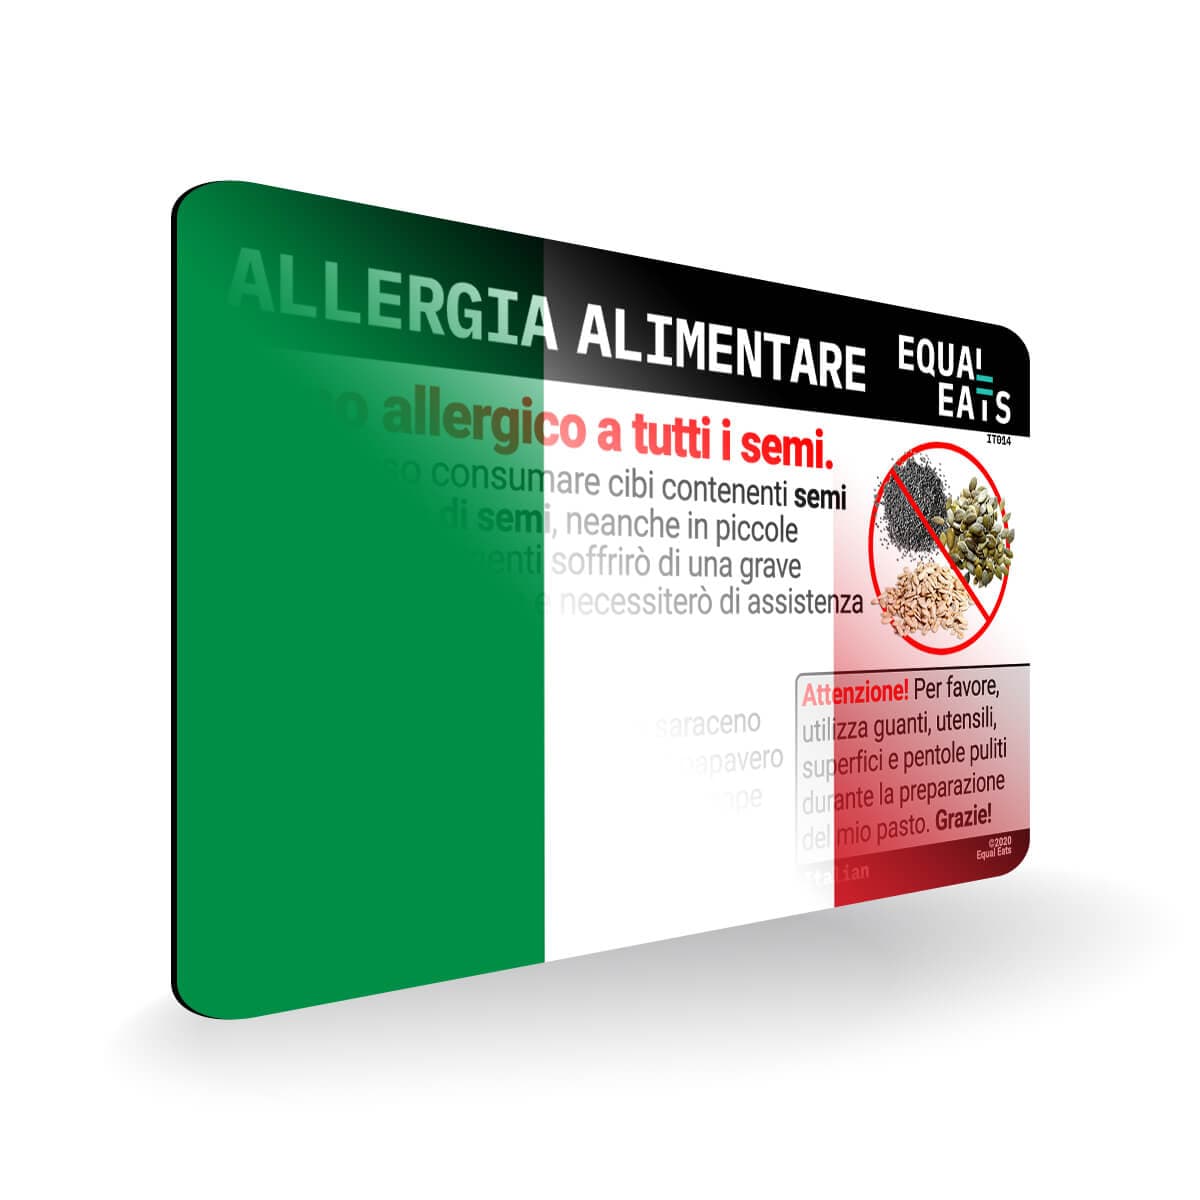 Seed Allergy in Italian. Seed Allergy Card for Italy